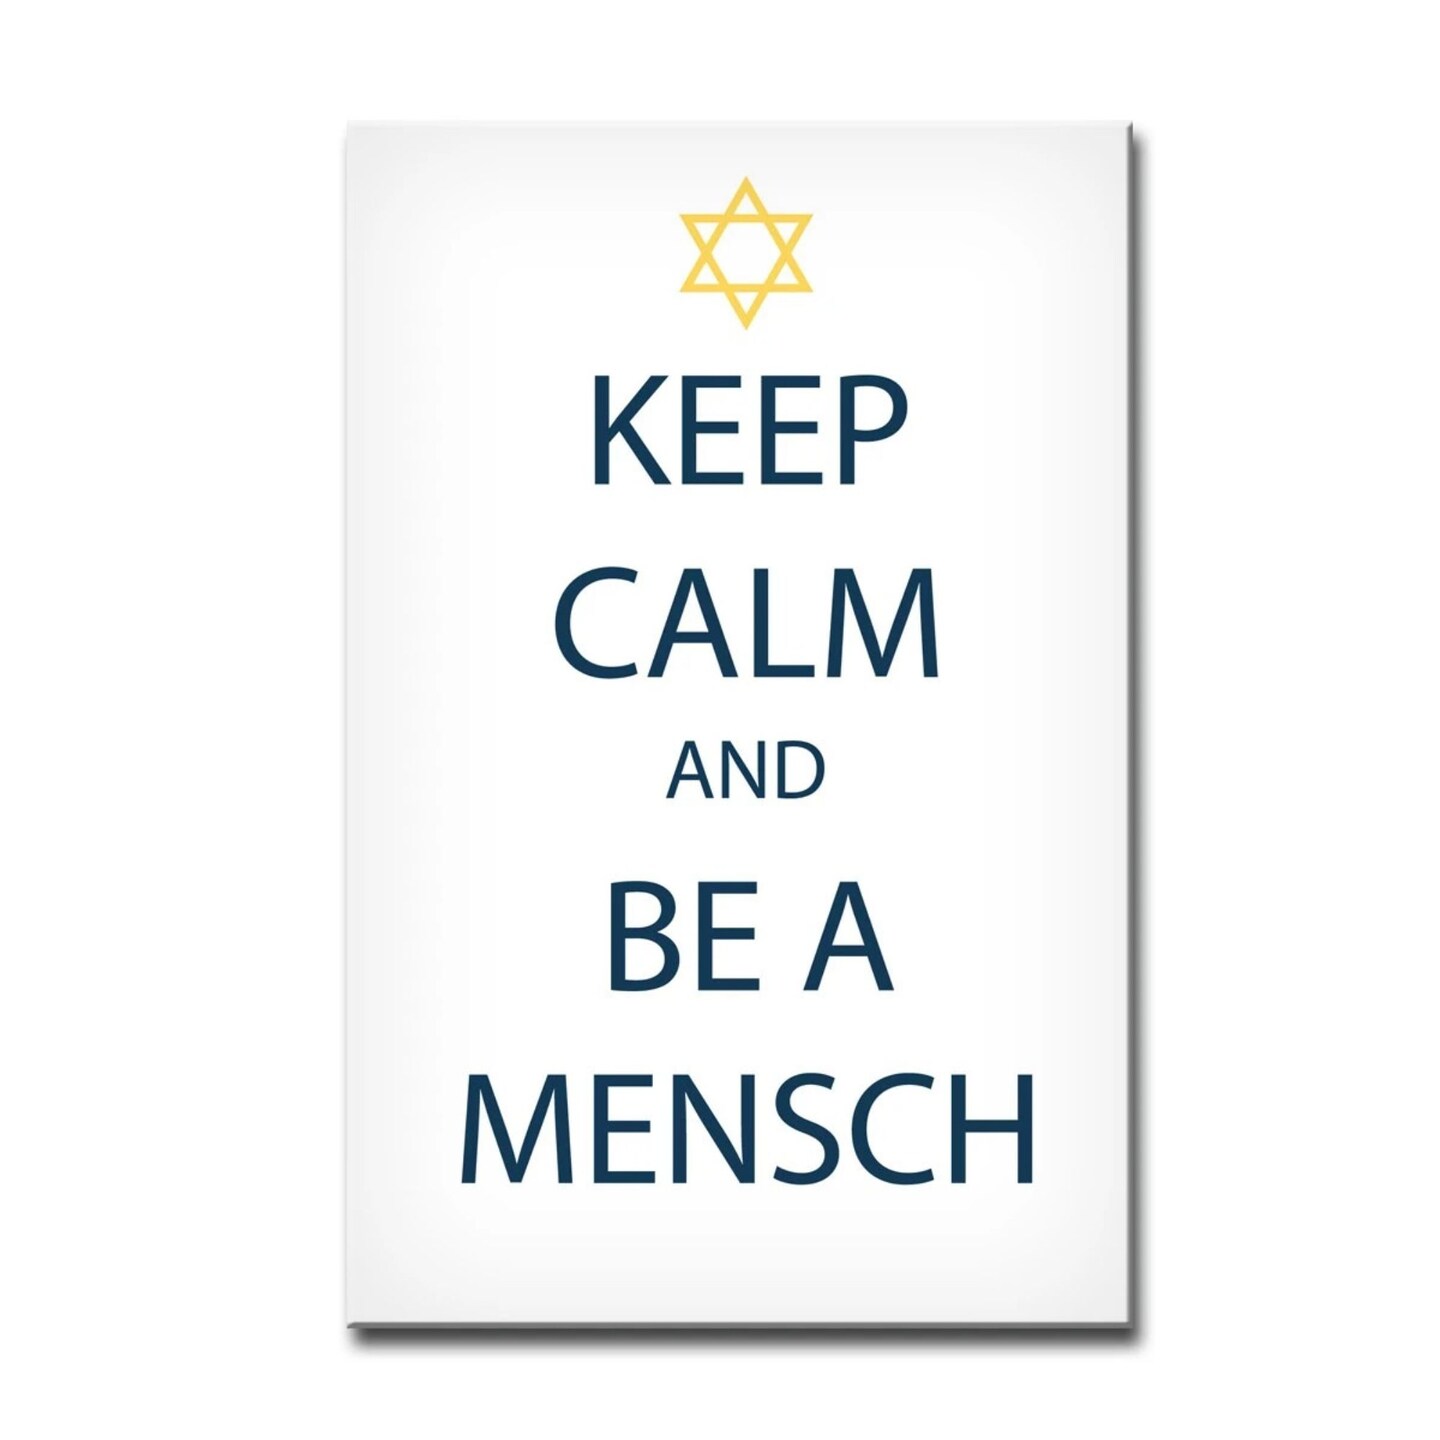 Crafted Creations White and Navy Blue &#x22;KEEP CALM AND BE A MENSCH&#x22; Hanukkah Rectangular Cotton Wall Art Decor 30&#x22; x 20&#x22;